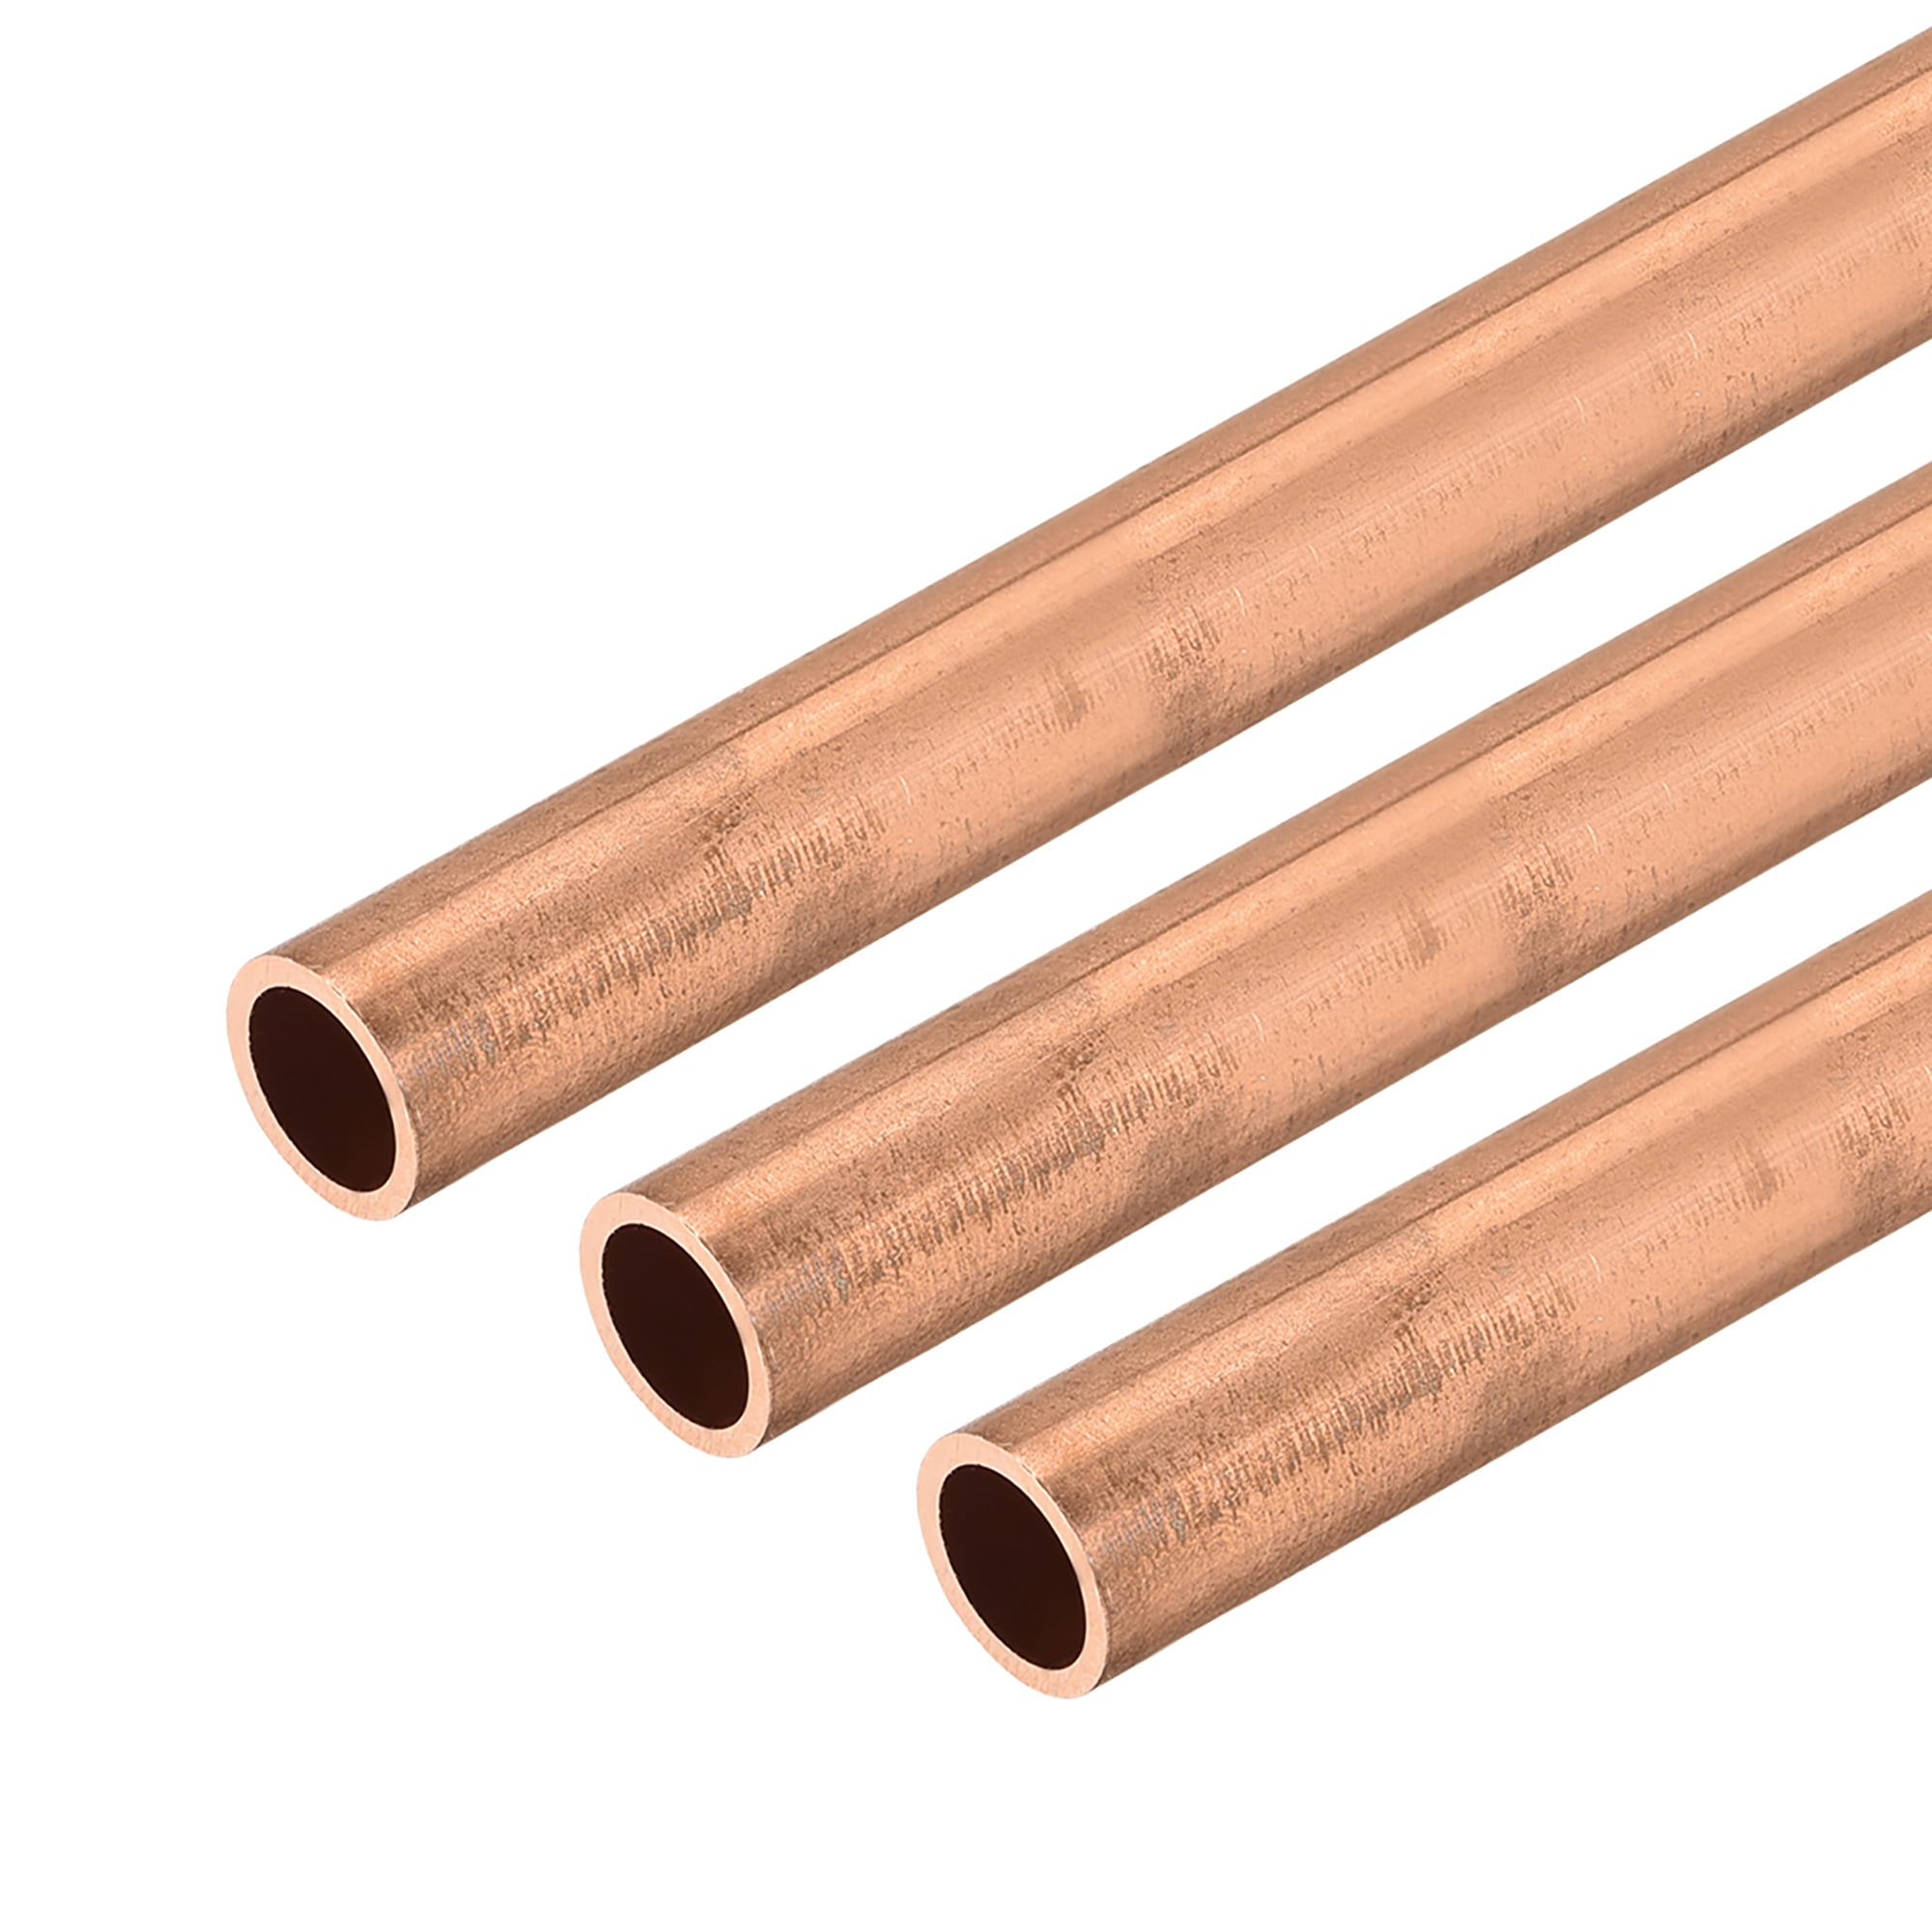 2mm OD 0.2mm Wall Thickness 300mm Long Straight Pipe Tubing 2 Pcs uxcell Copper Round Tube 